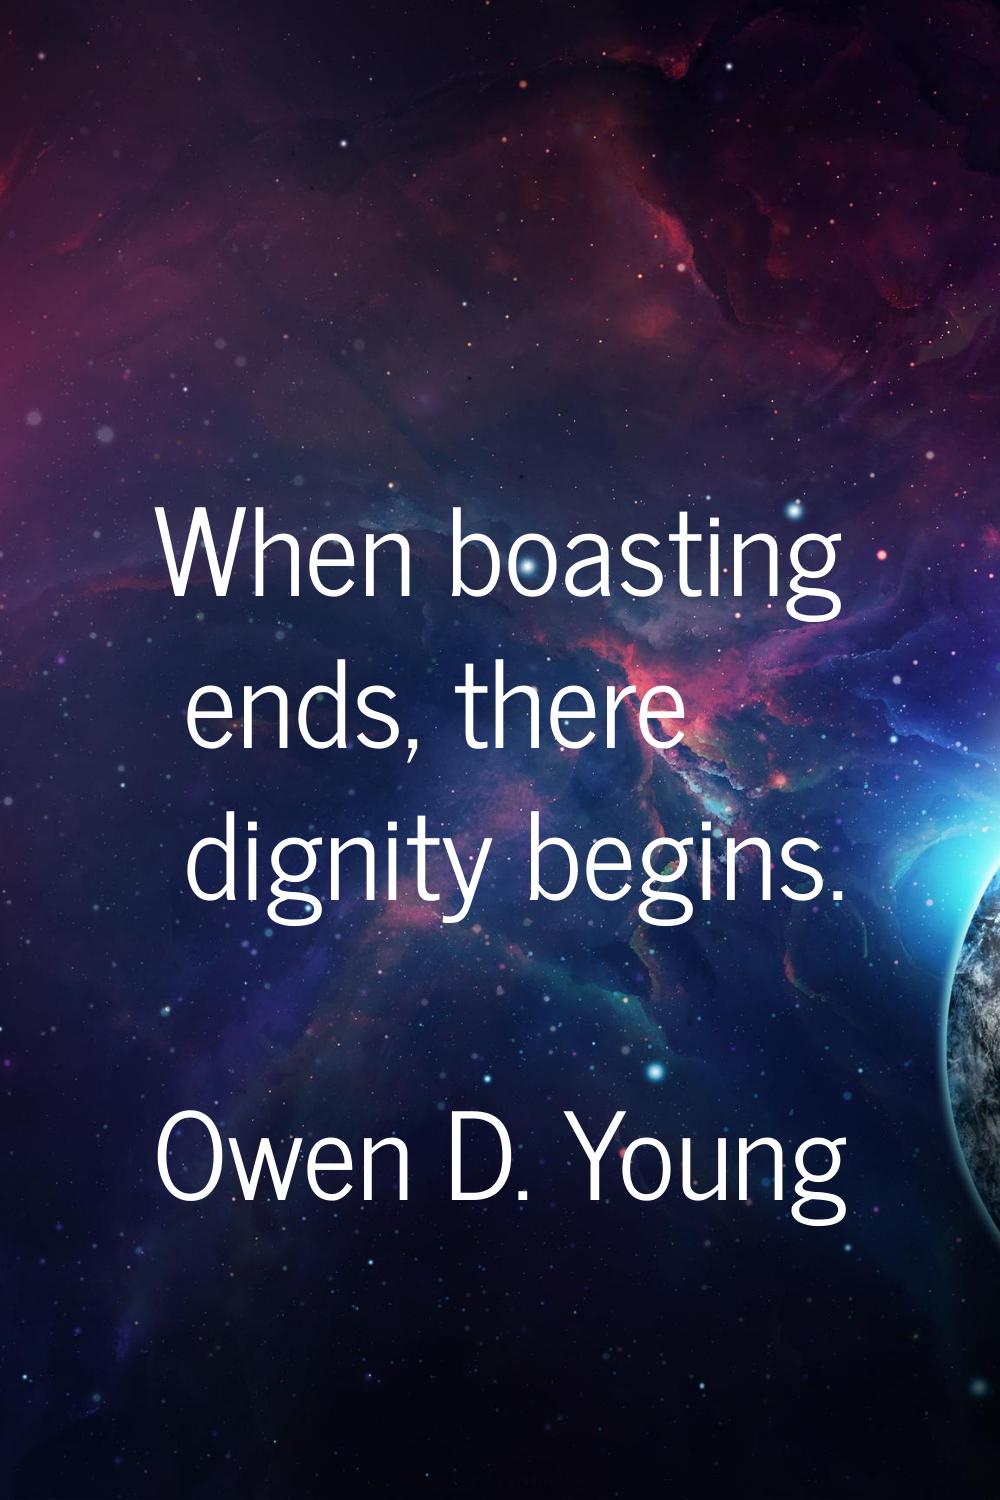 When boasting ends, there dignity begins.